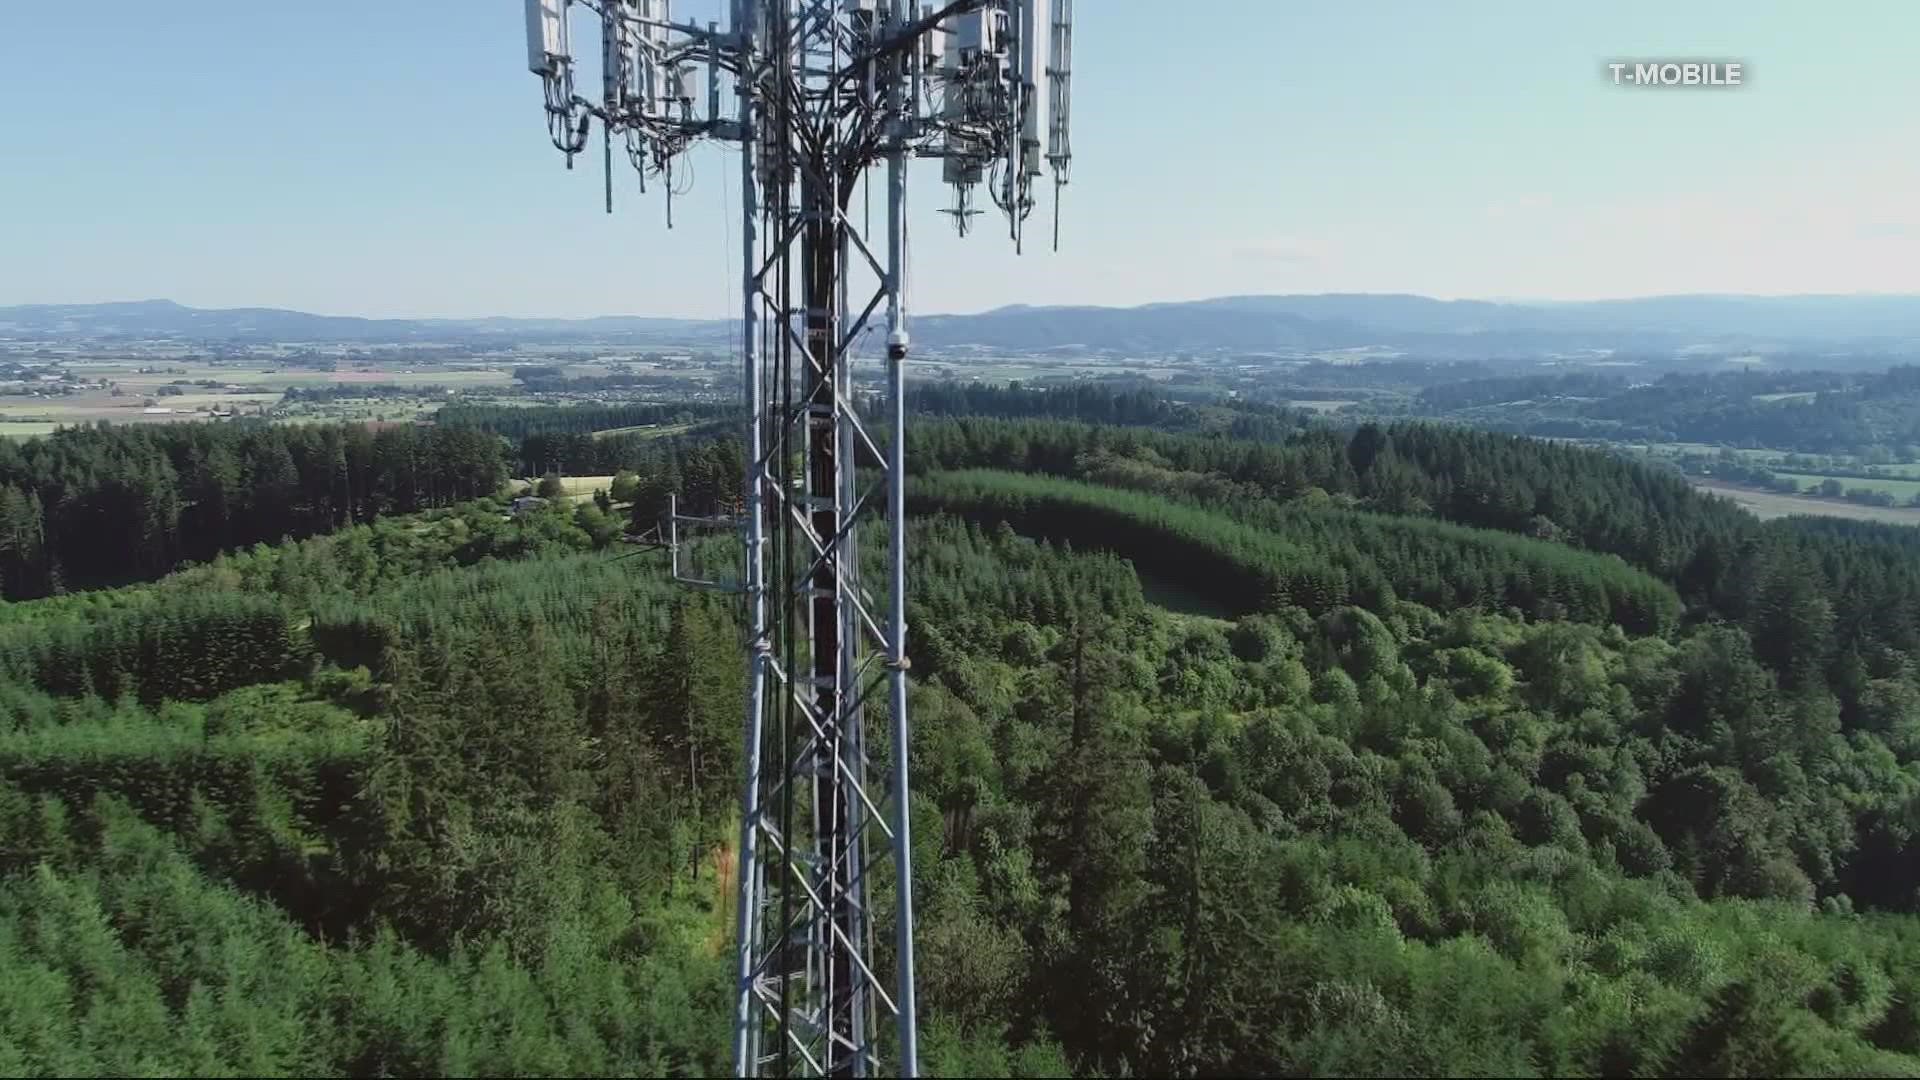 Over the last year, T-Mobile has been using its fast speed connection to help fight wildfires in Oregon.